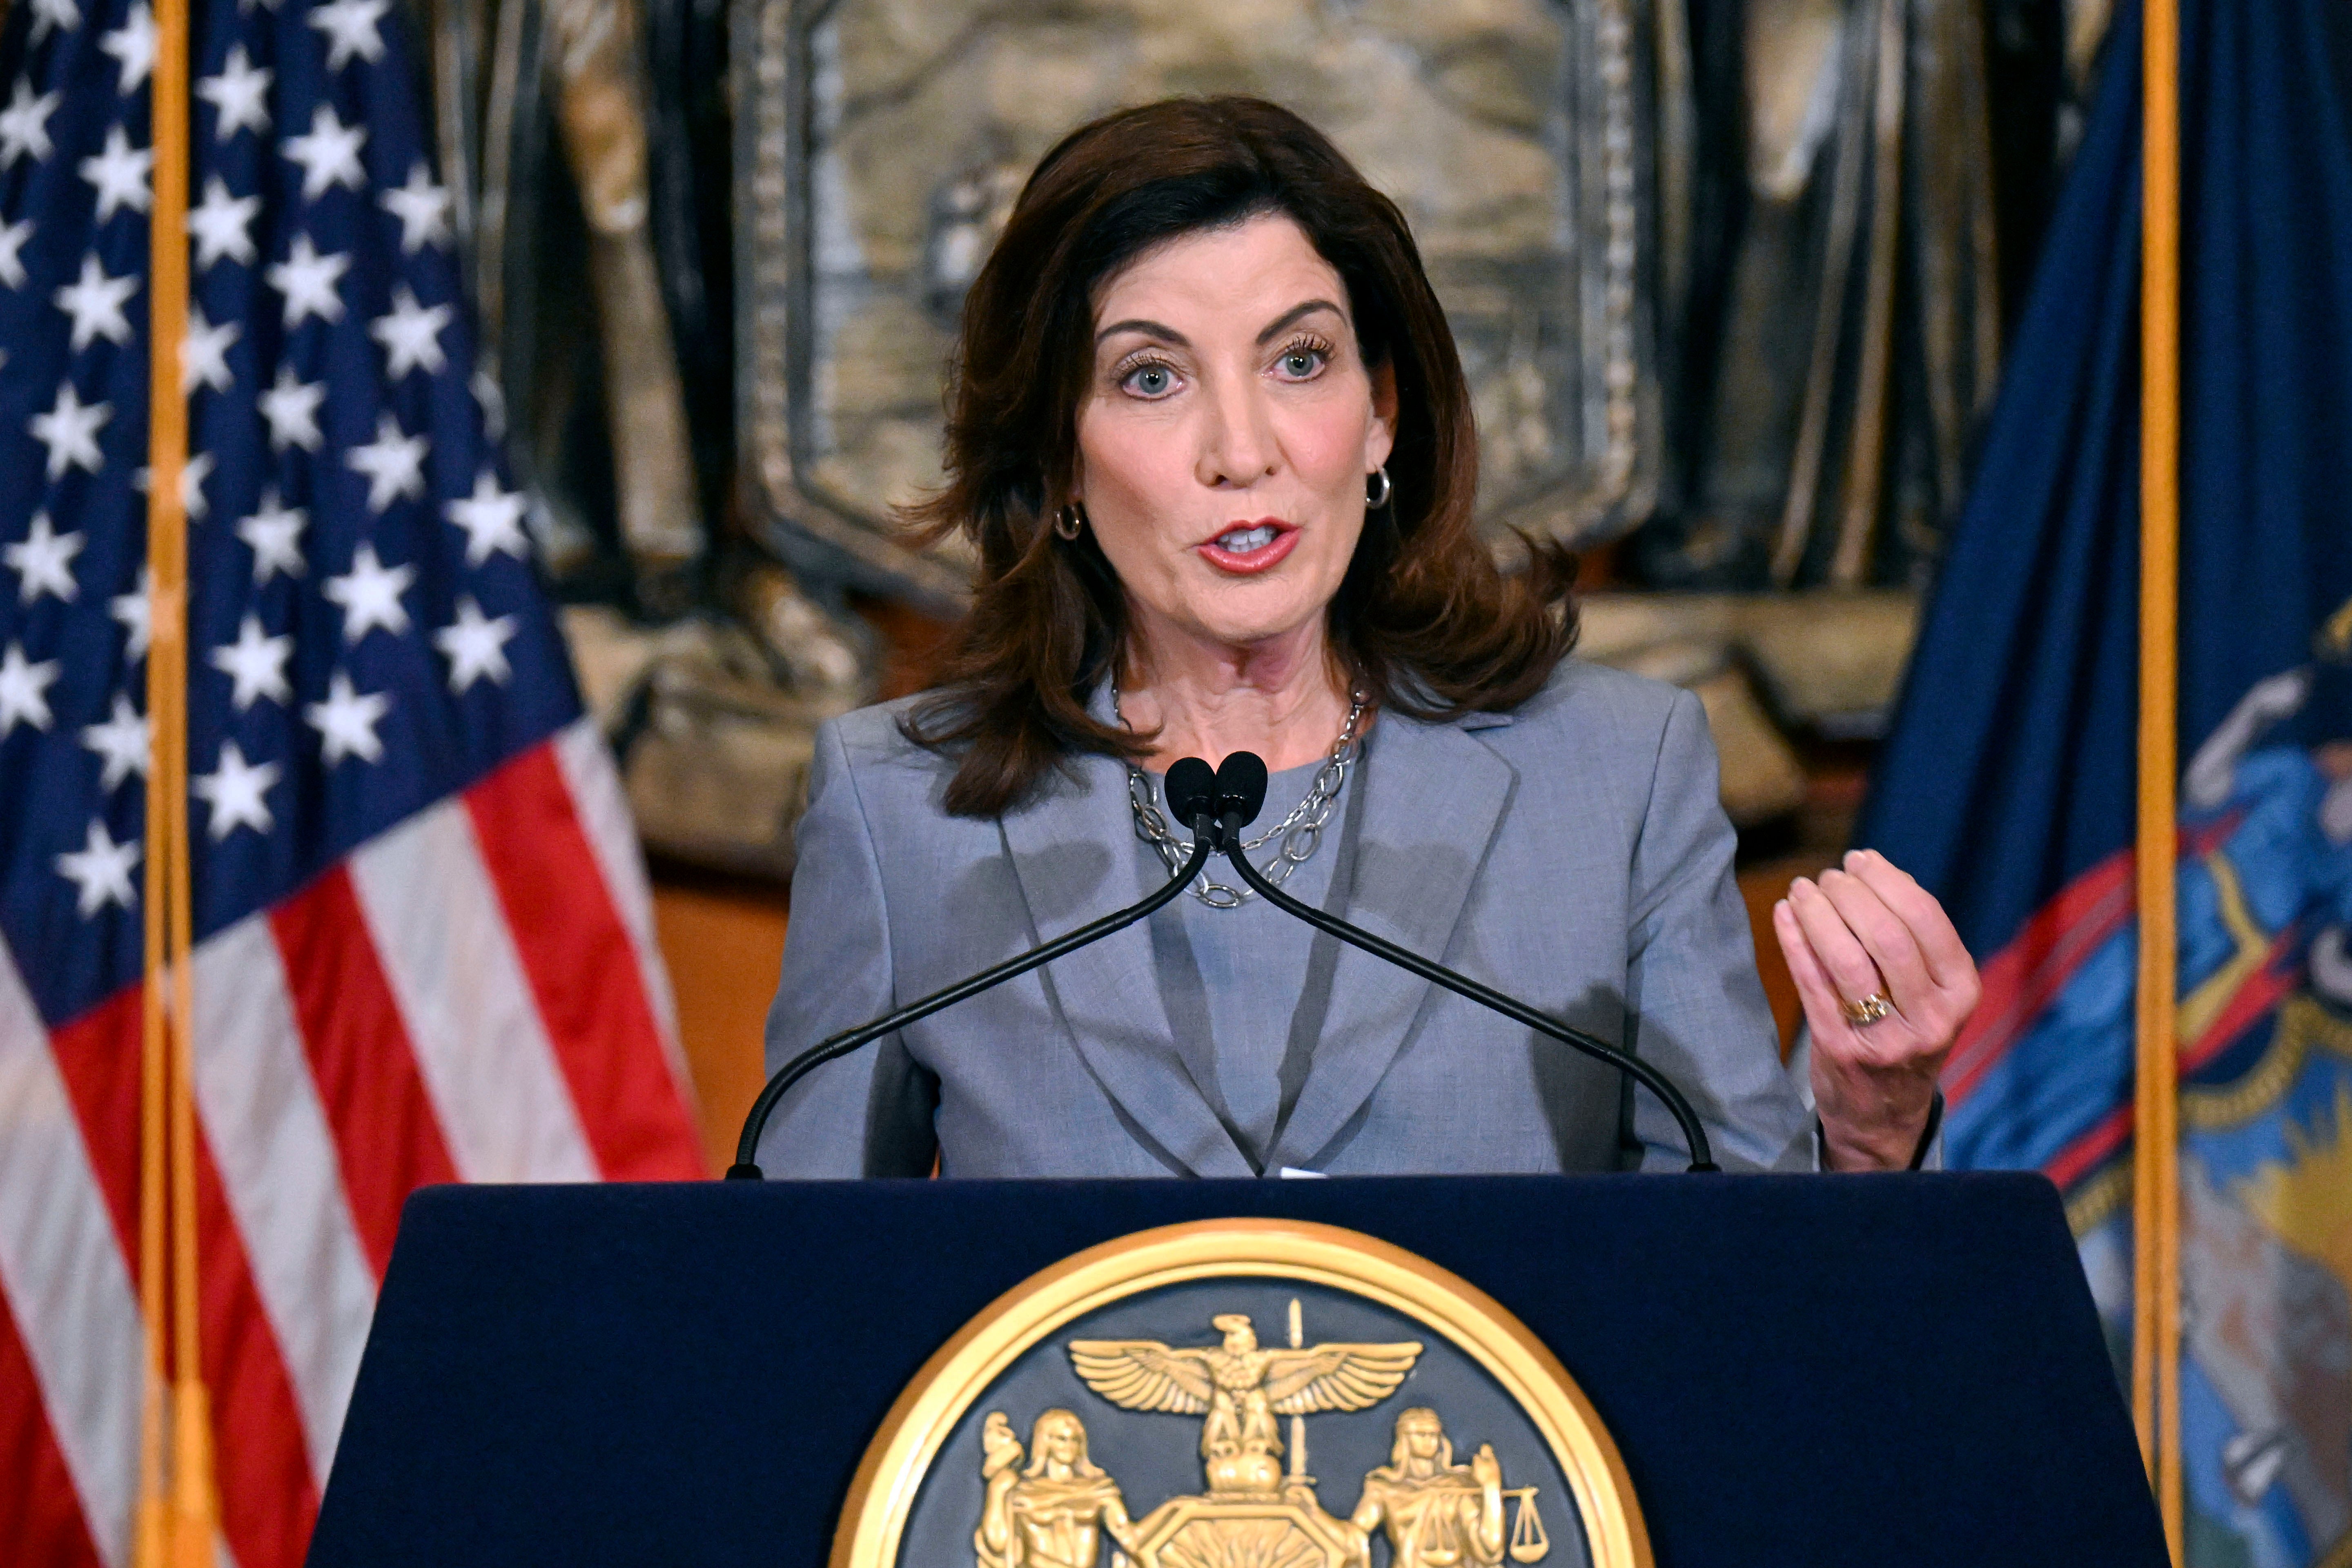 Governor Kathy Hochul declared a state of emergency for polio